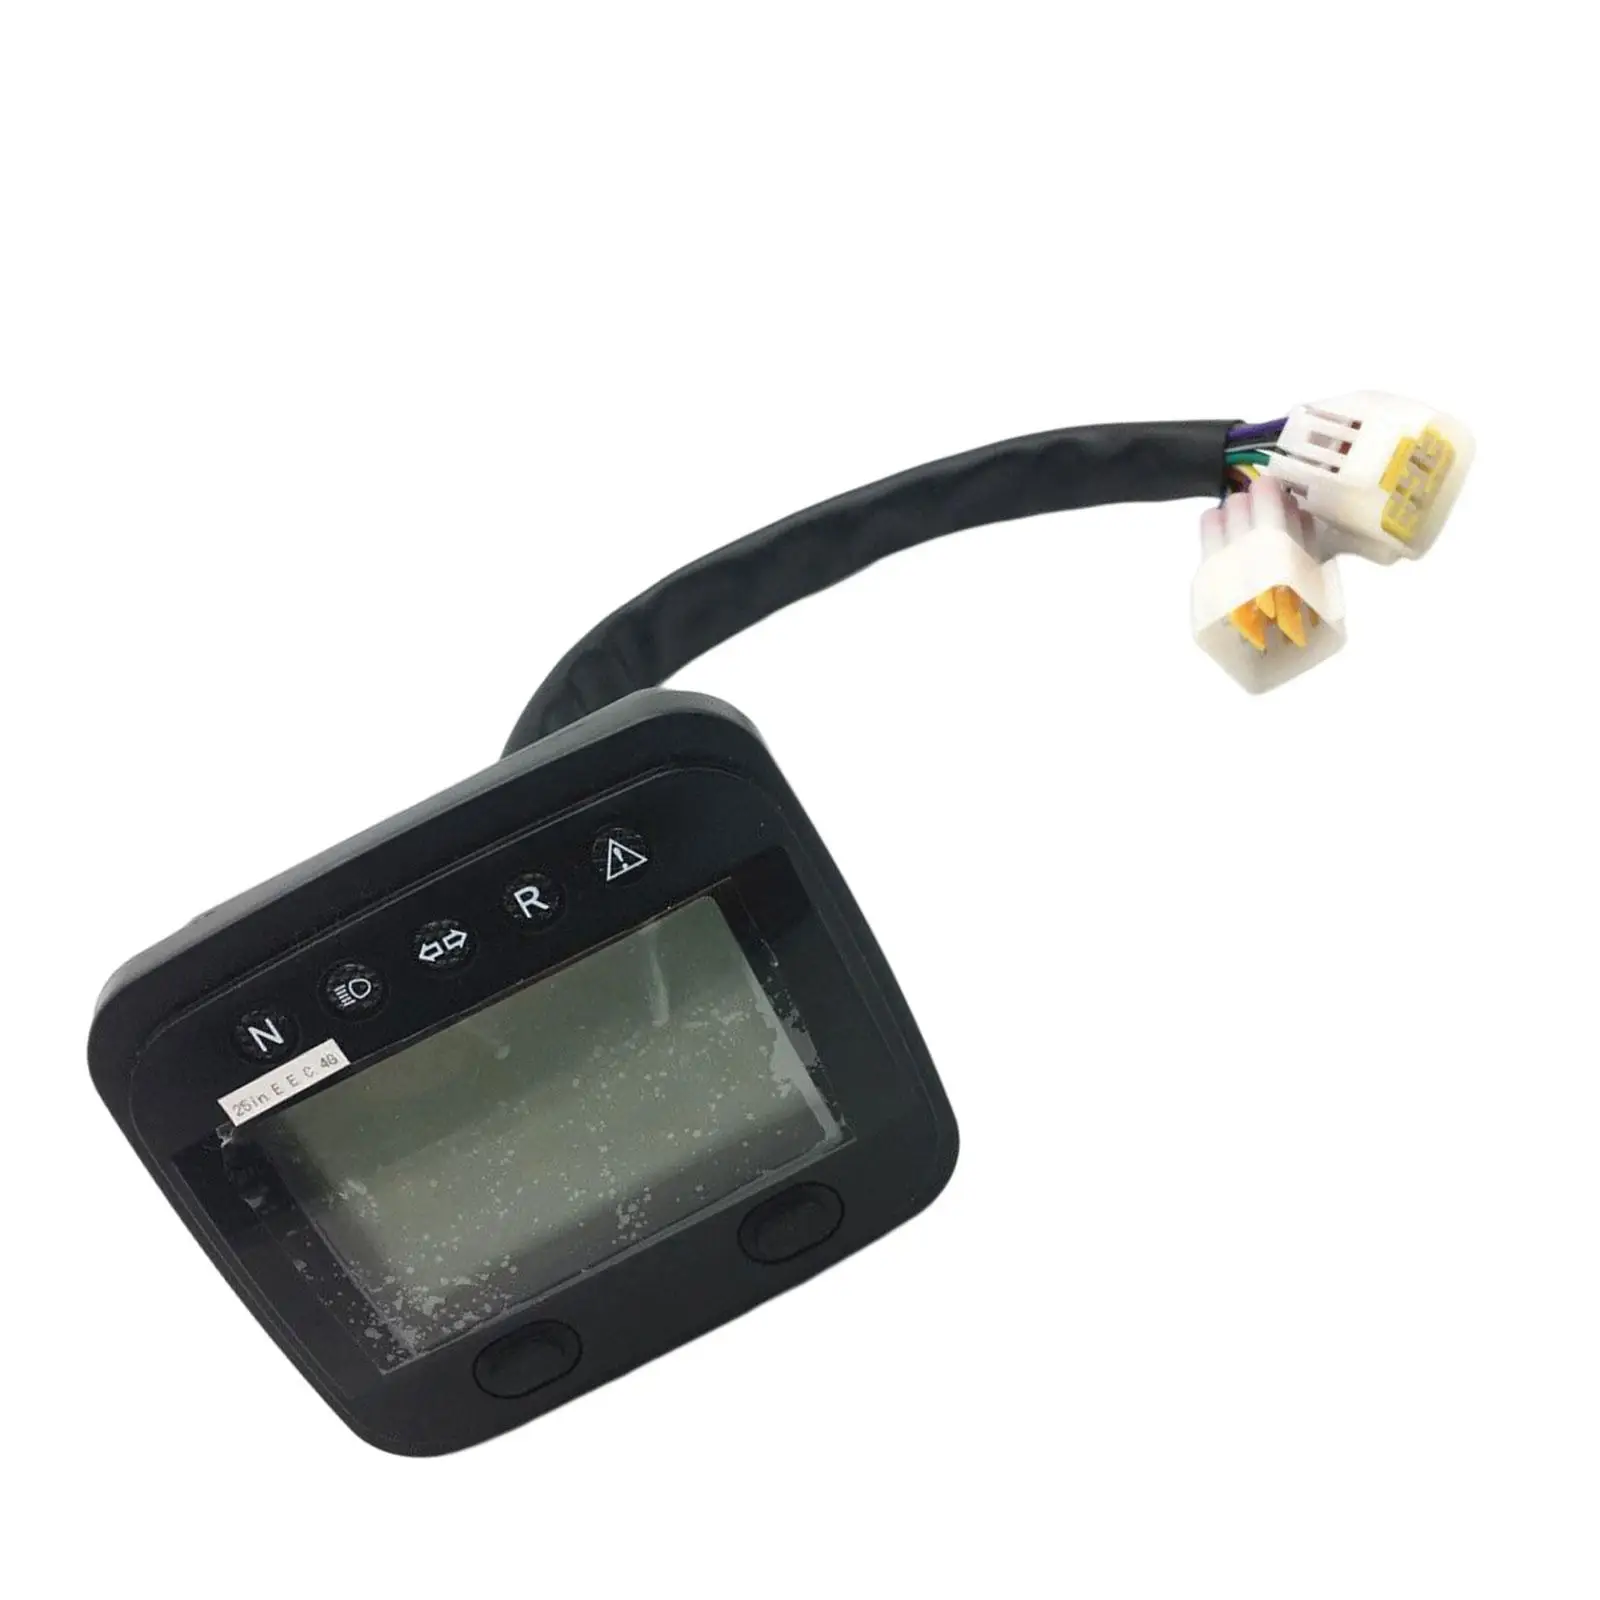 LCD Speedometer Meter Professional Sturdy Accs Good Performance Easy to Install Repair Parts Motorcycle Gauge for 500cc ATV